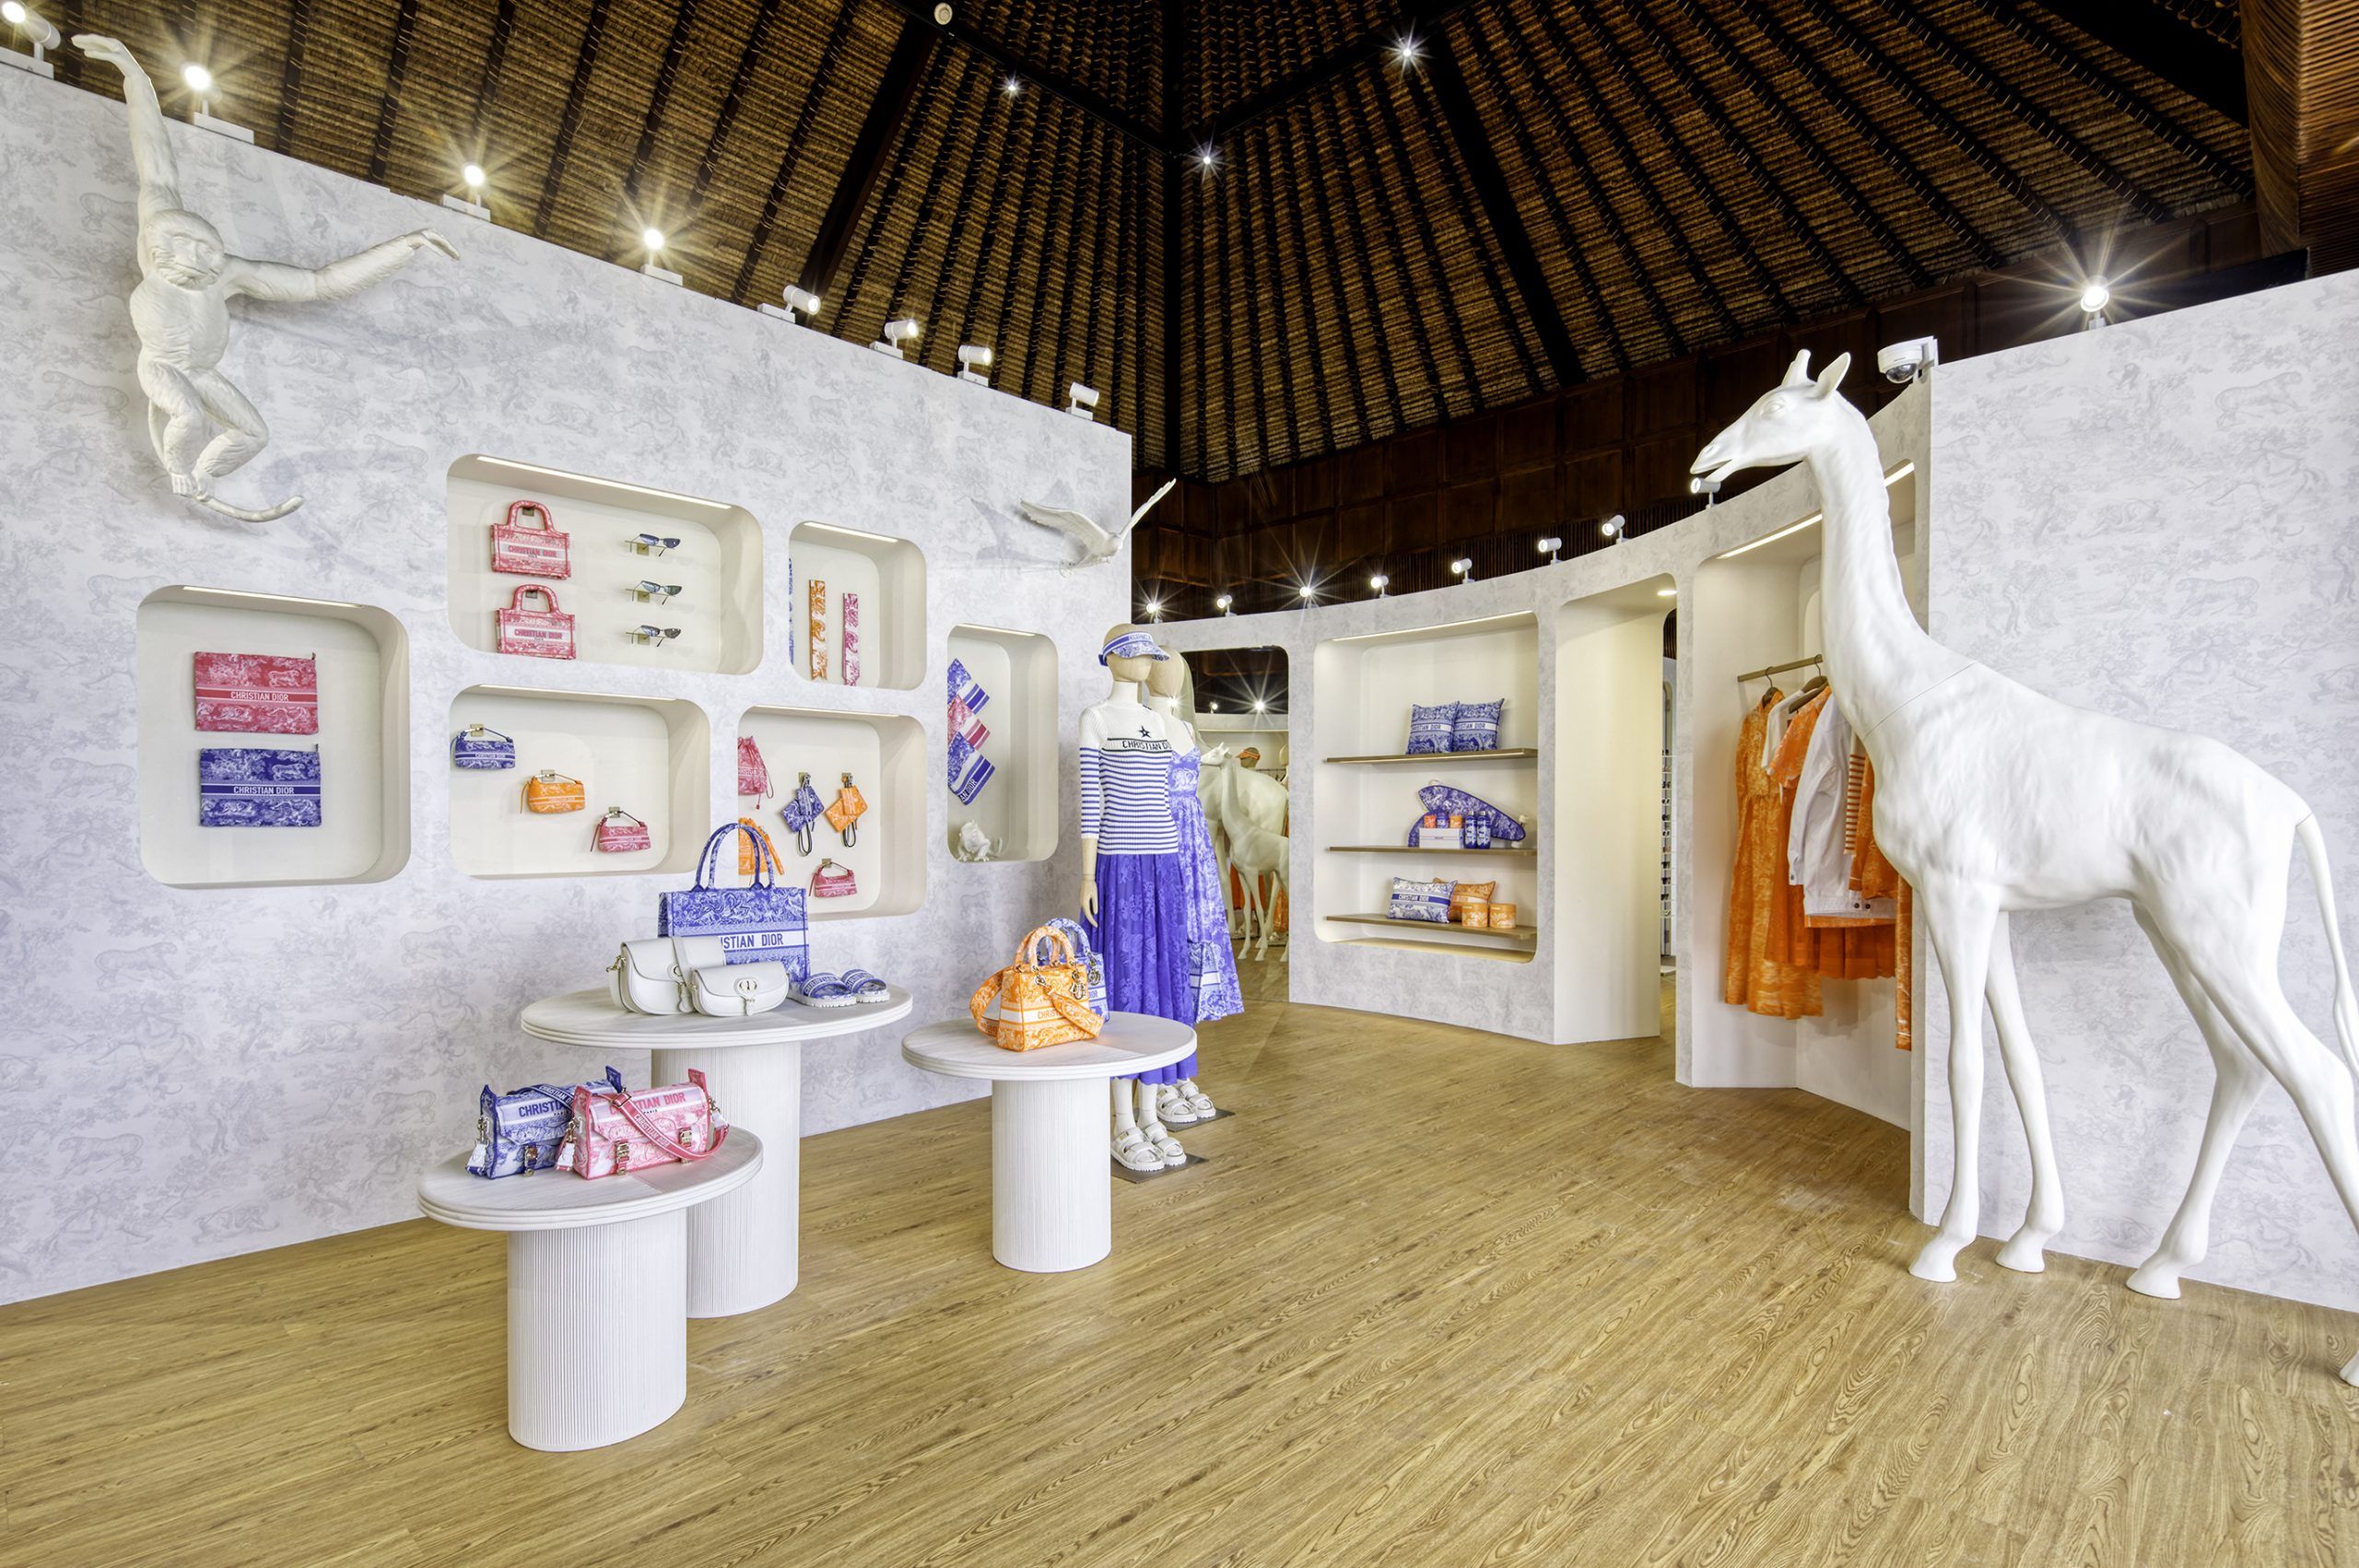 The Dioriviera pop-up and concept stores - News and Events - News